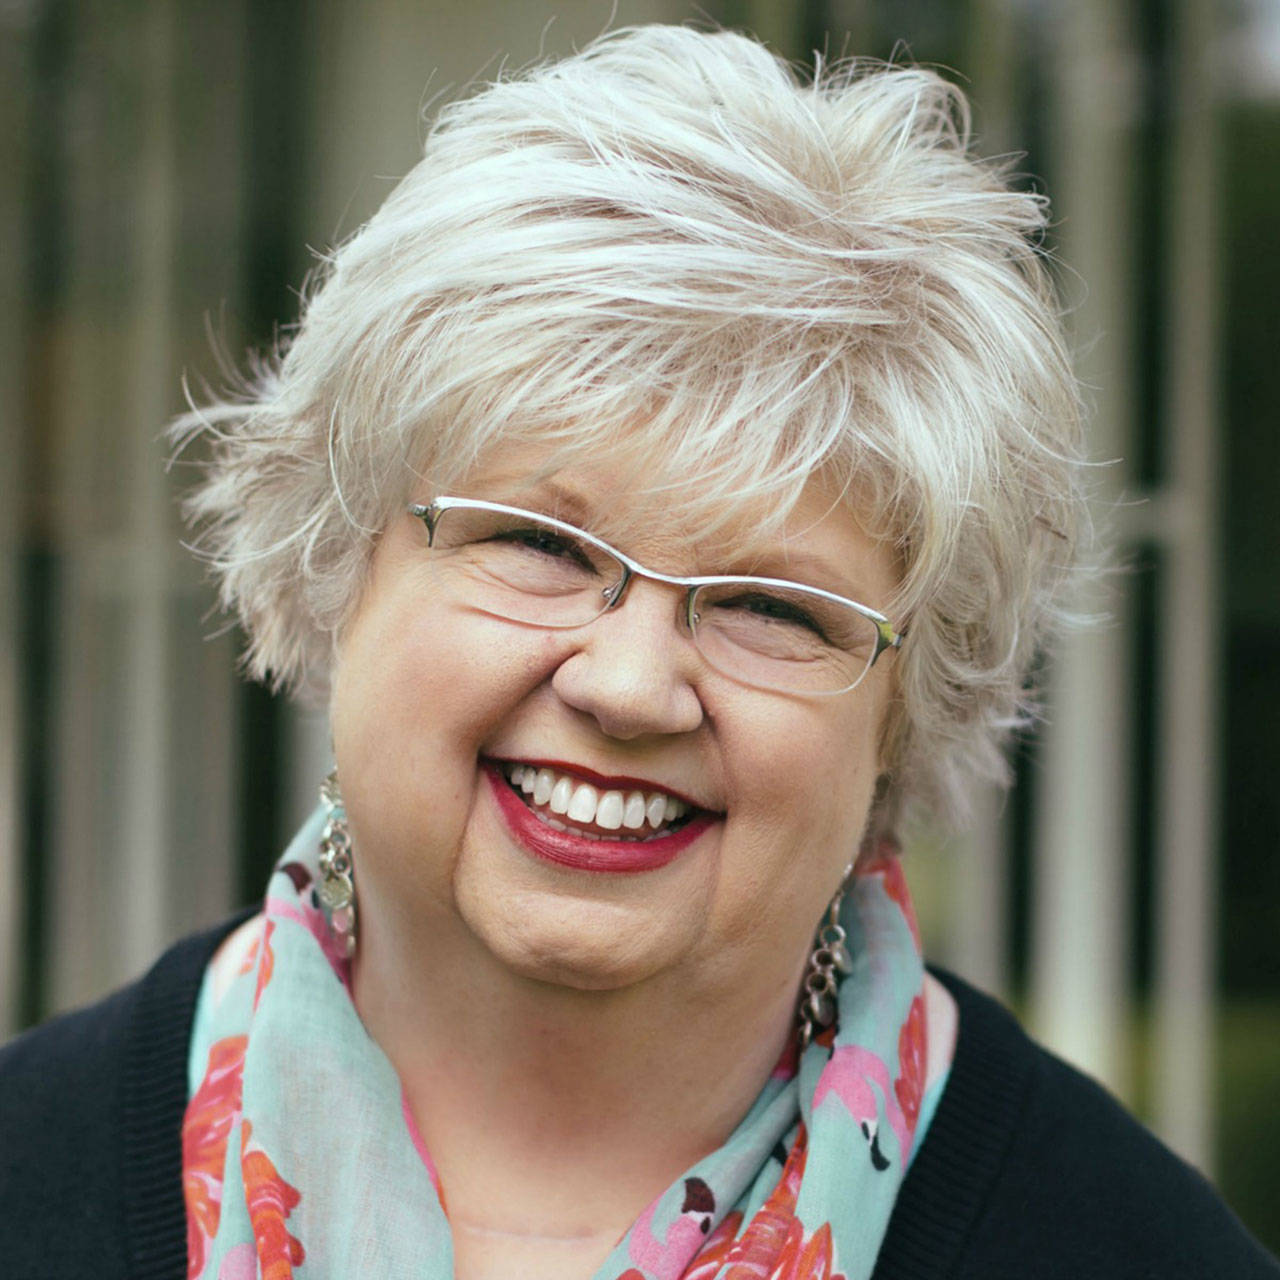 Best-selling Christian author Liz Curtis Higgs speaks at Olympic Peninsula Women’s Fellowship’s “Encounter Jesus” weekend on Feb. 22-23 at Sequim High School. Photo courtesy of OPWF